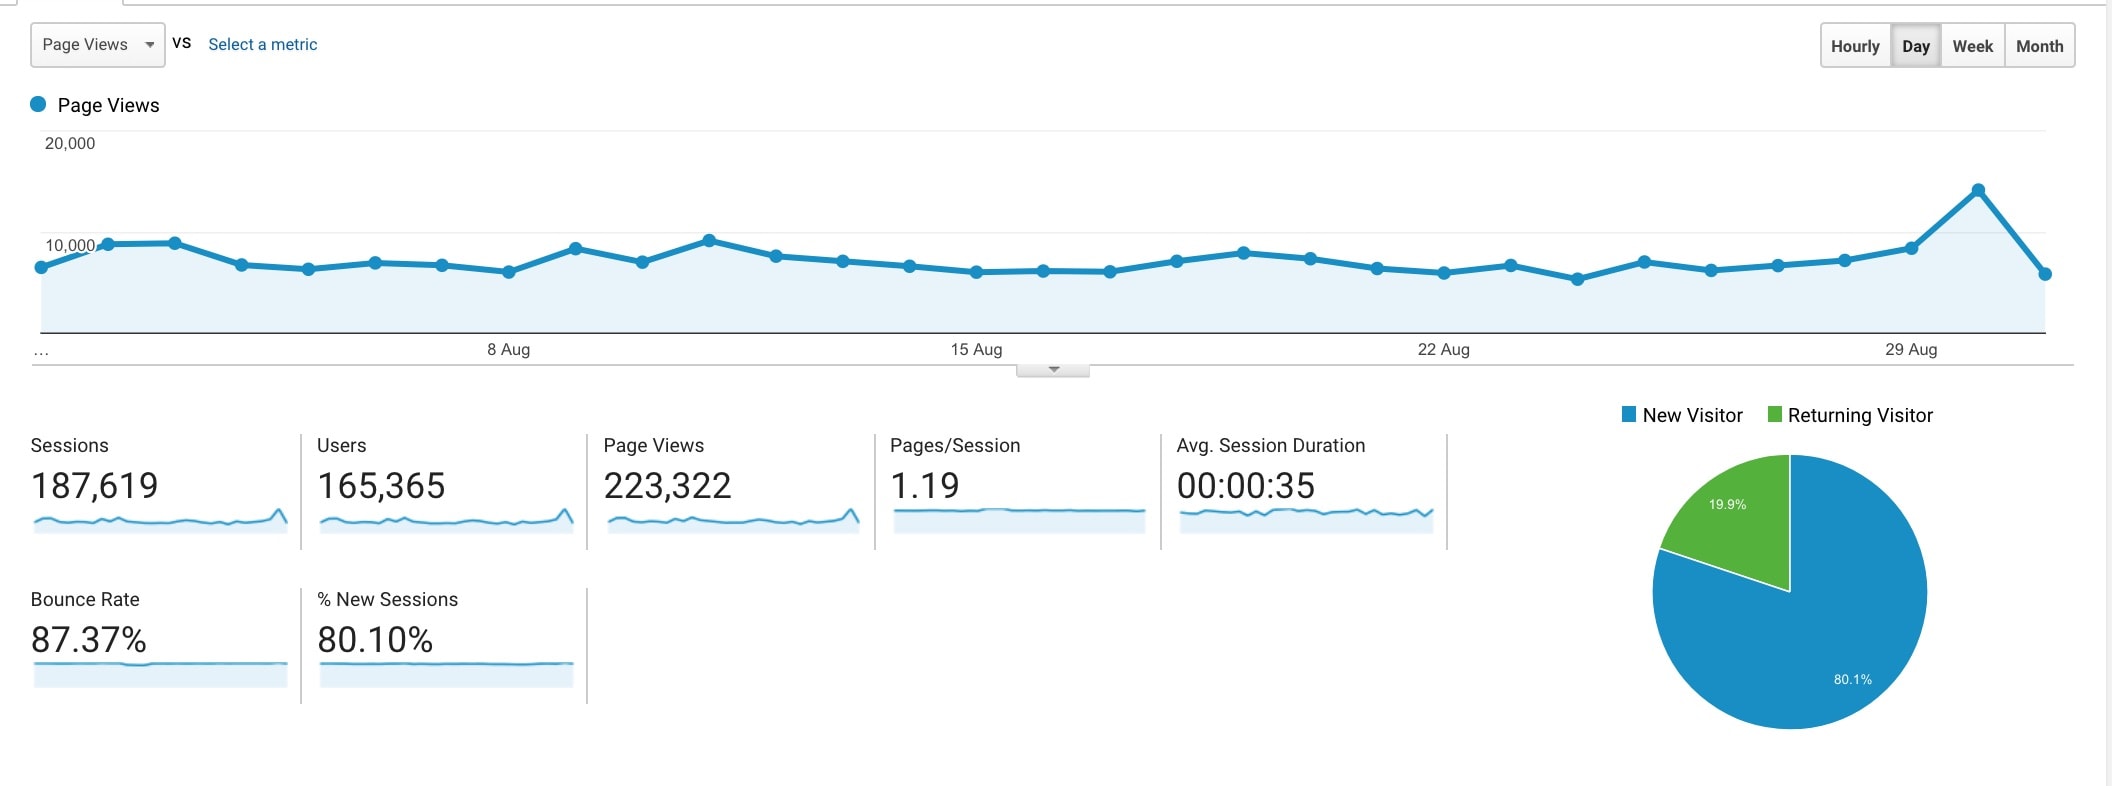 august-income-traffic-report-pageviews